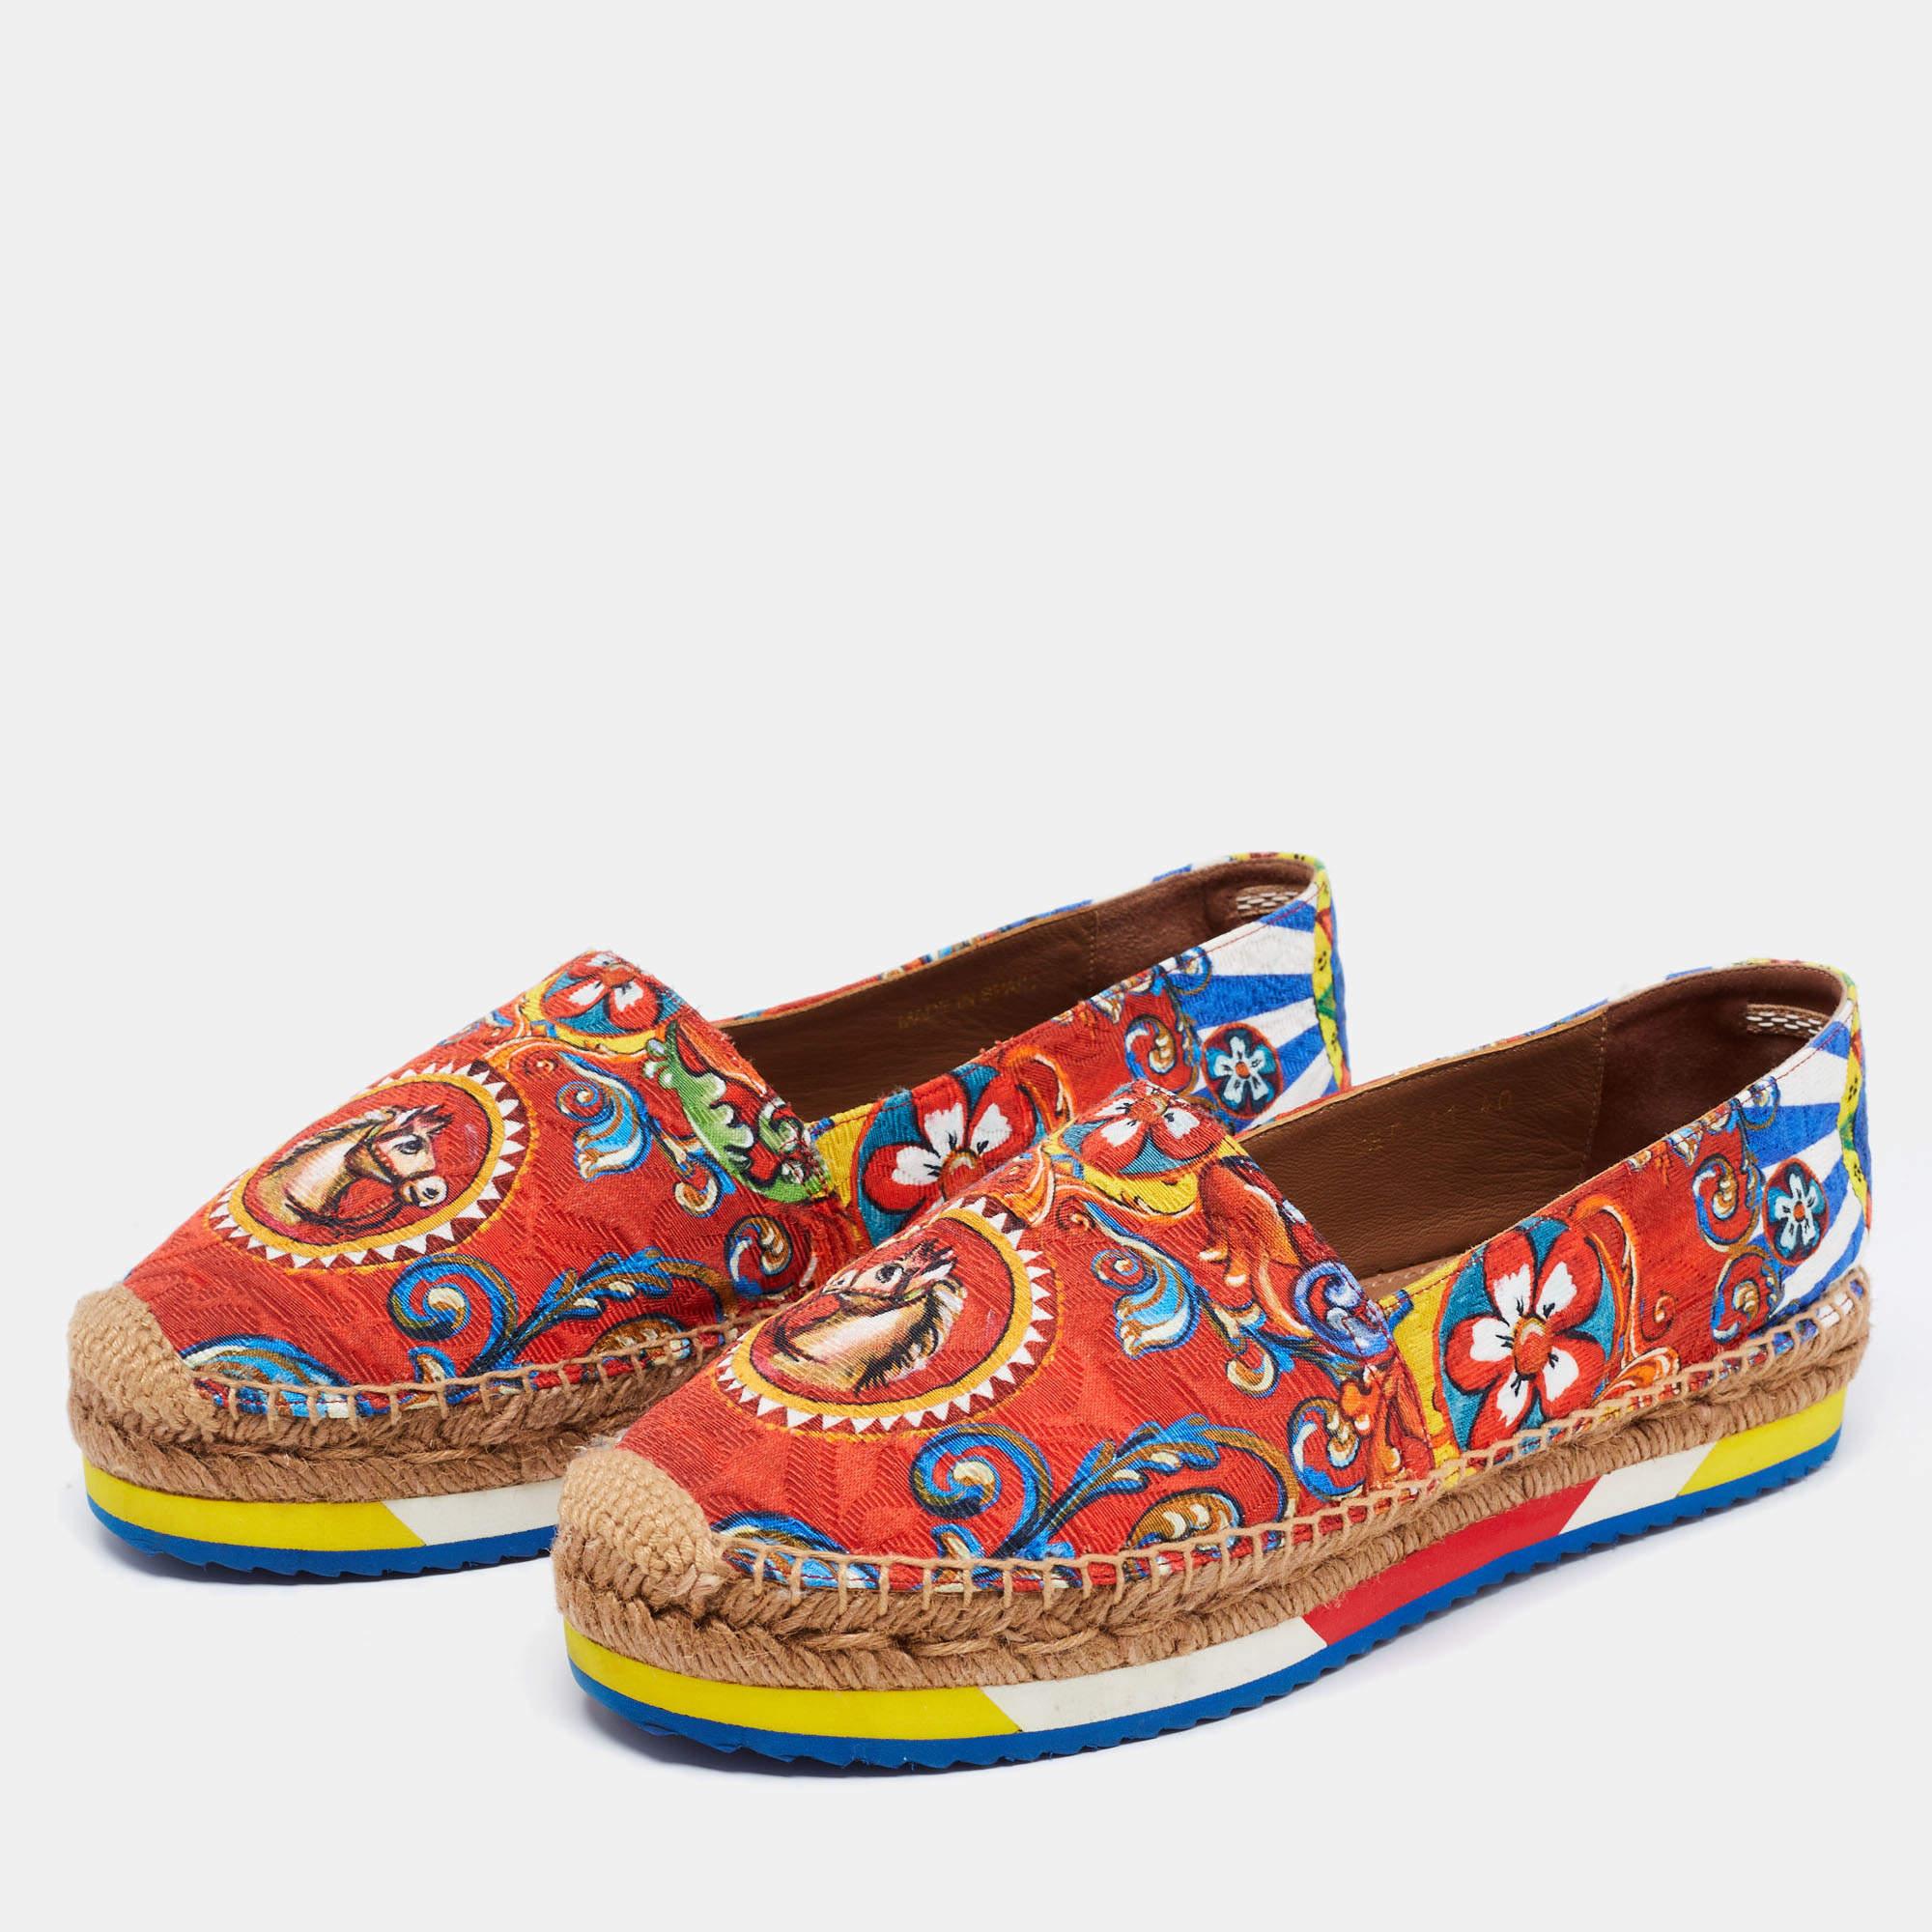 These exquisite Dolce & Gabbana espadrilles spell “take me to Italy”! The extraordinary print is inspired by traditional Italian heritage with its rich hues and unparalleled intricacy of the stunning motifs that reflect this label's roots.